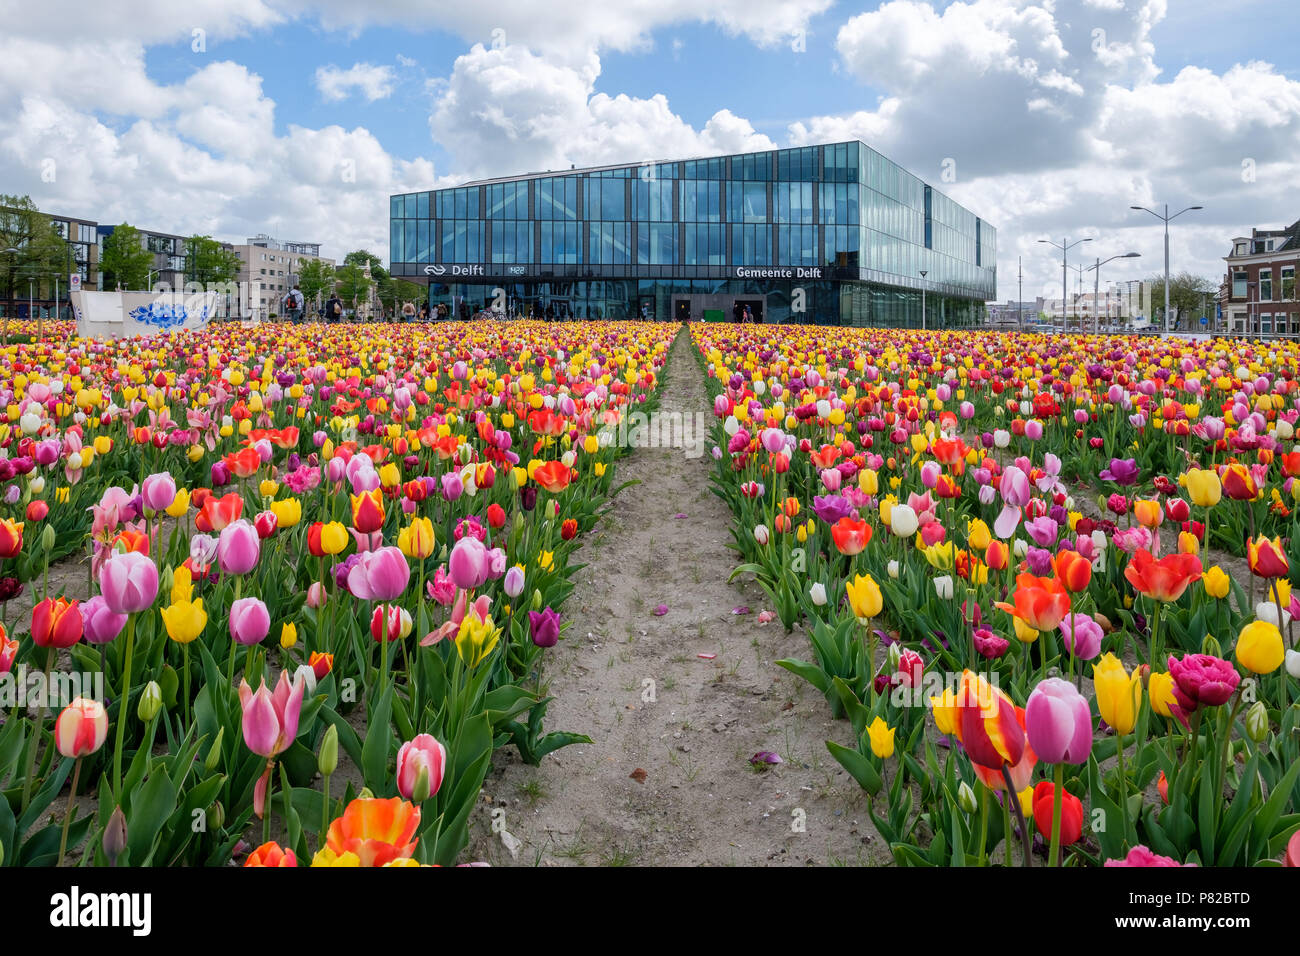 A tulip garden in front of the new town hall / railway station in Delft, Netherlands Stock Photo